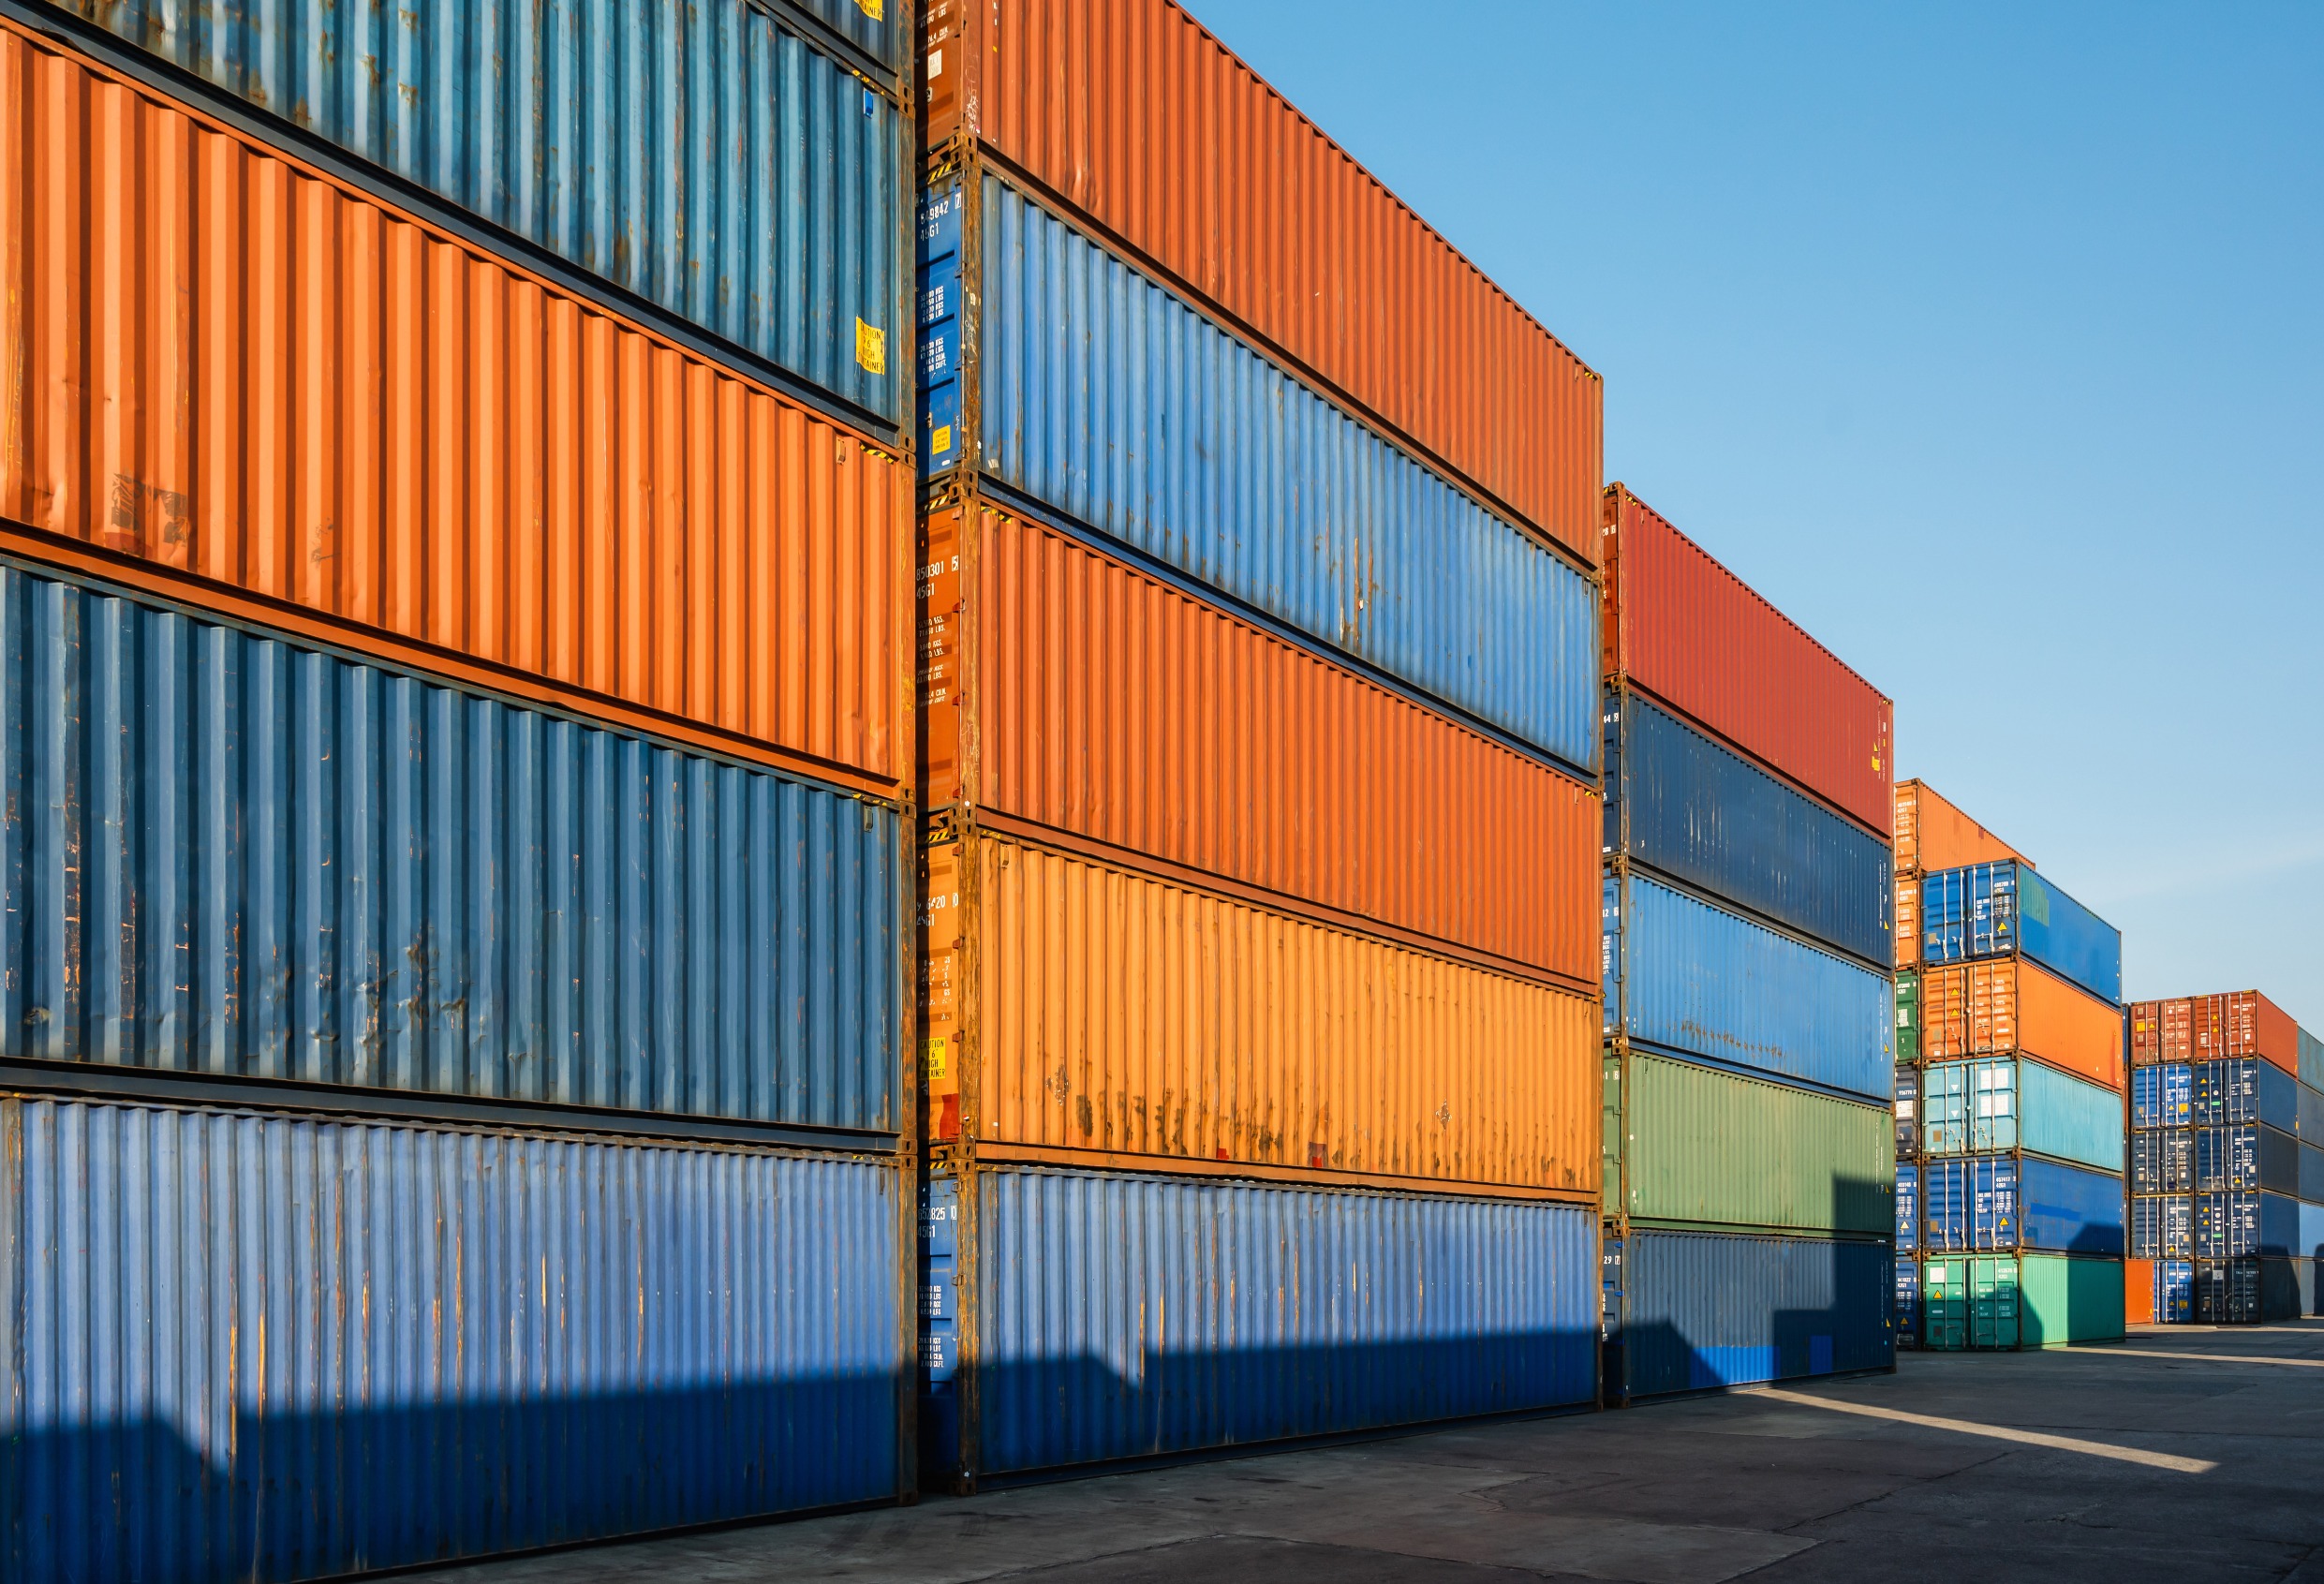 The 7 Most Common Types of Containers